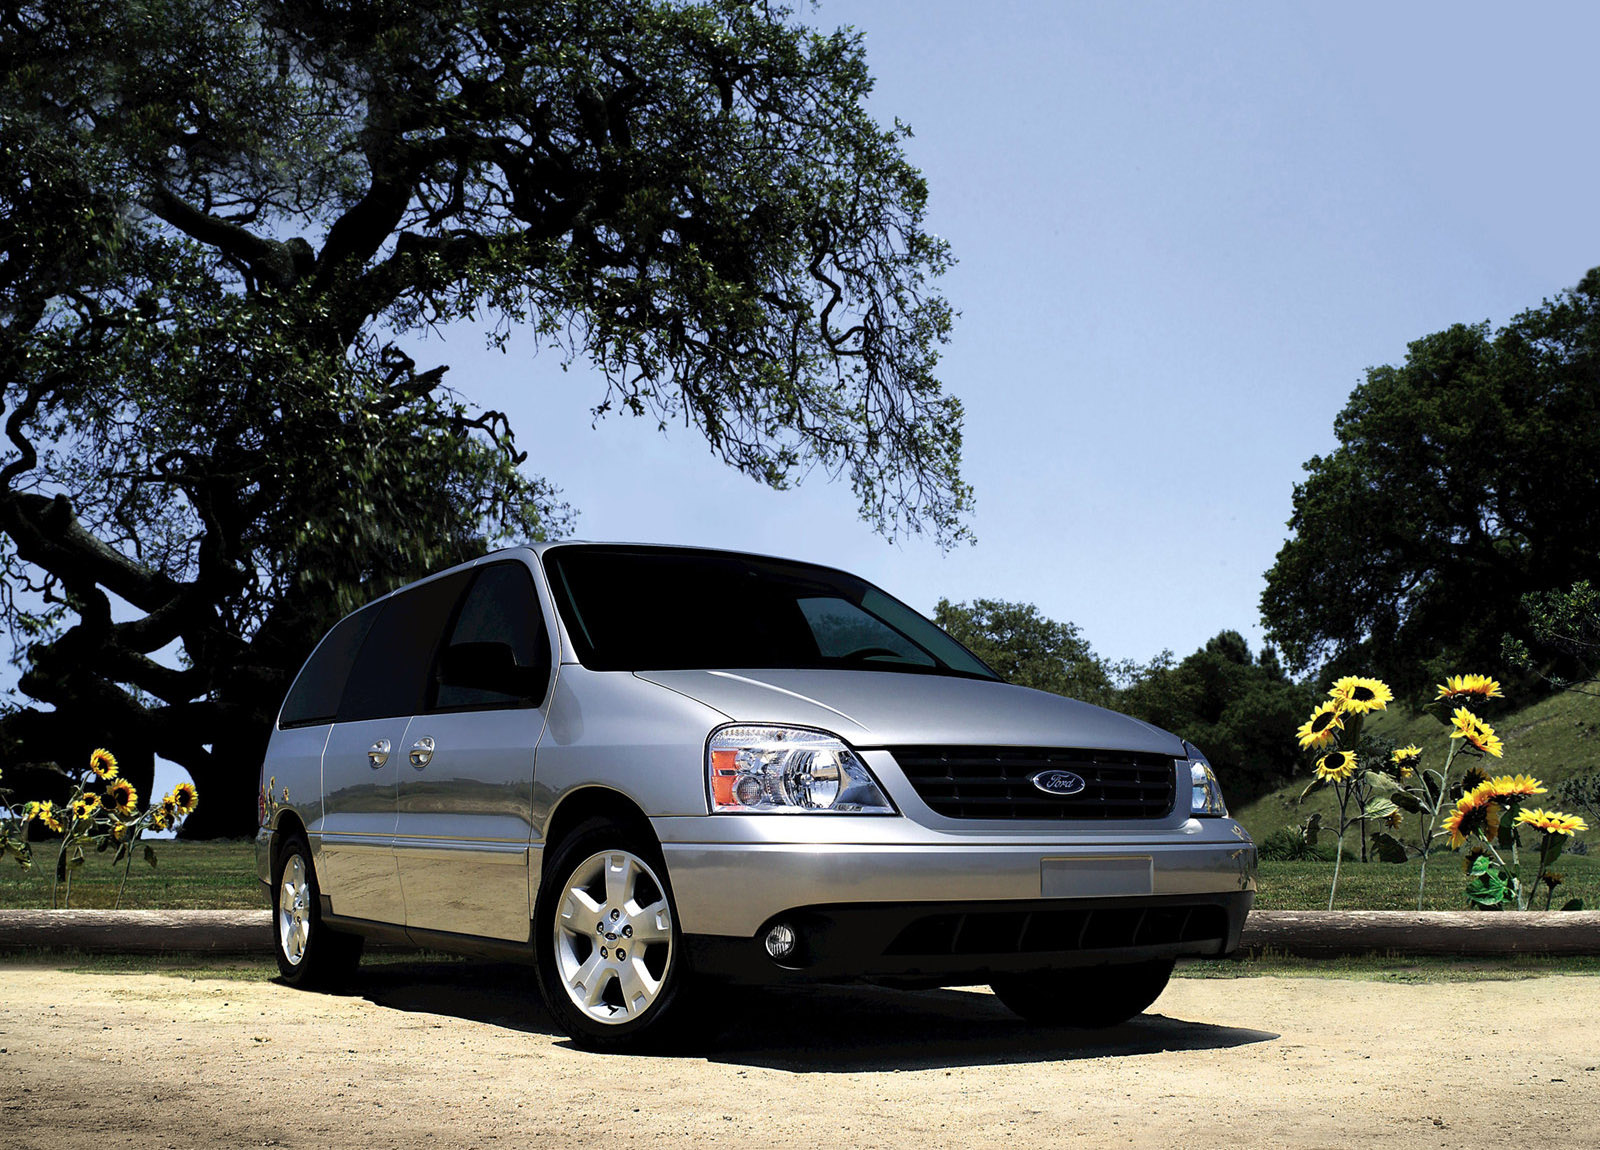 2006 Ford Freestar Hd Pictures